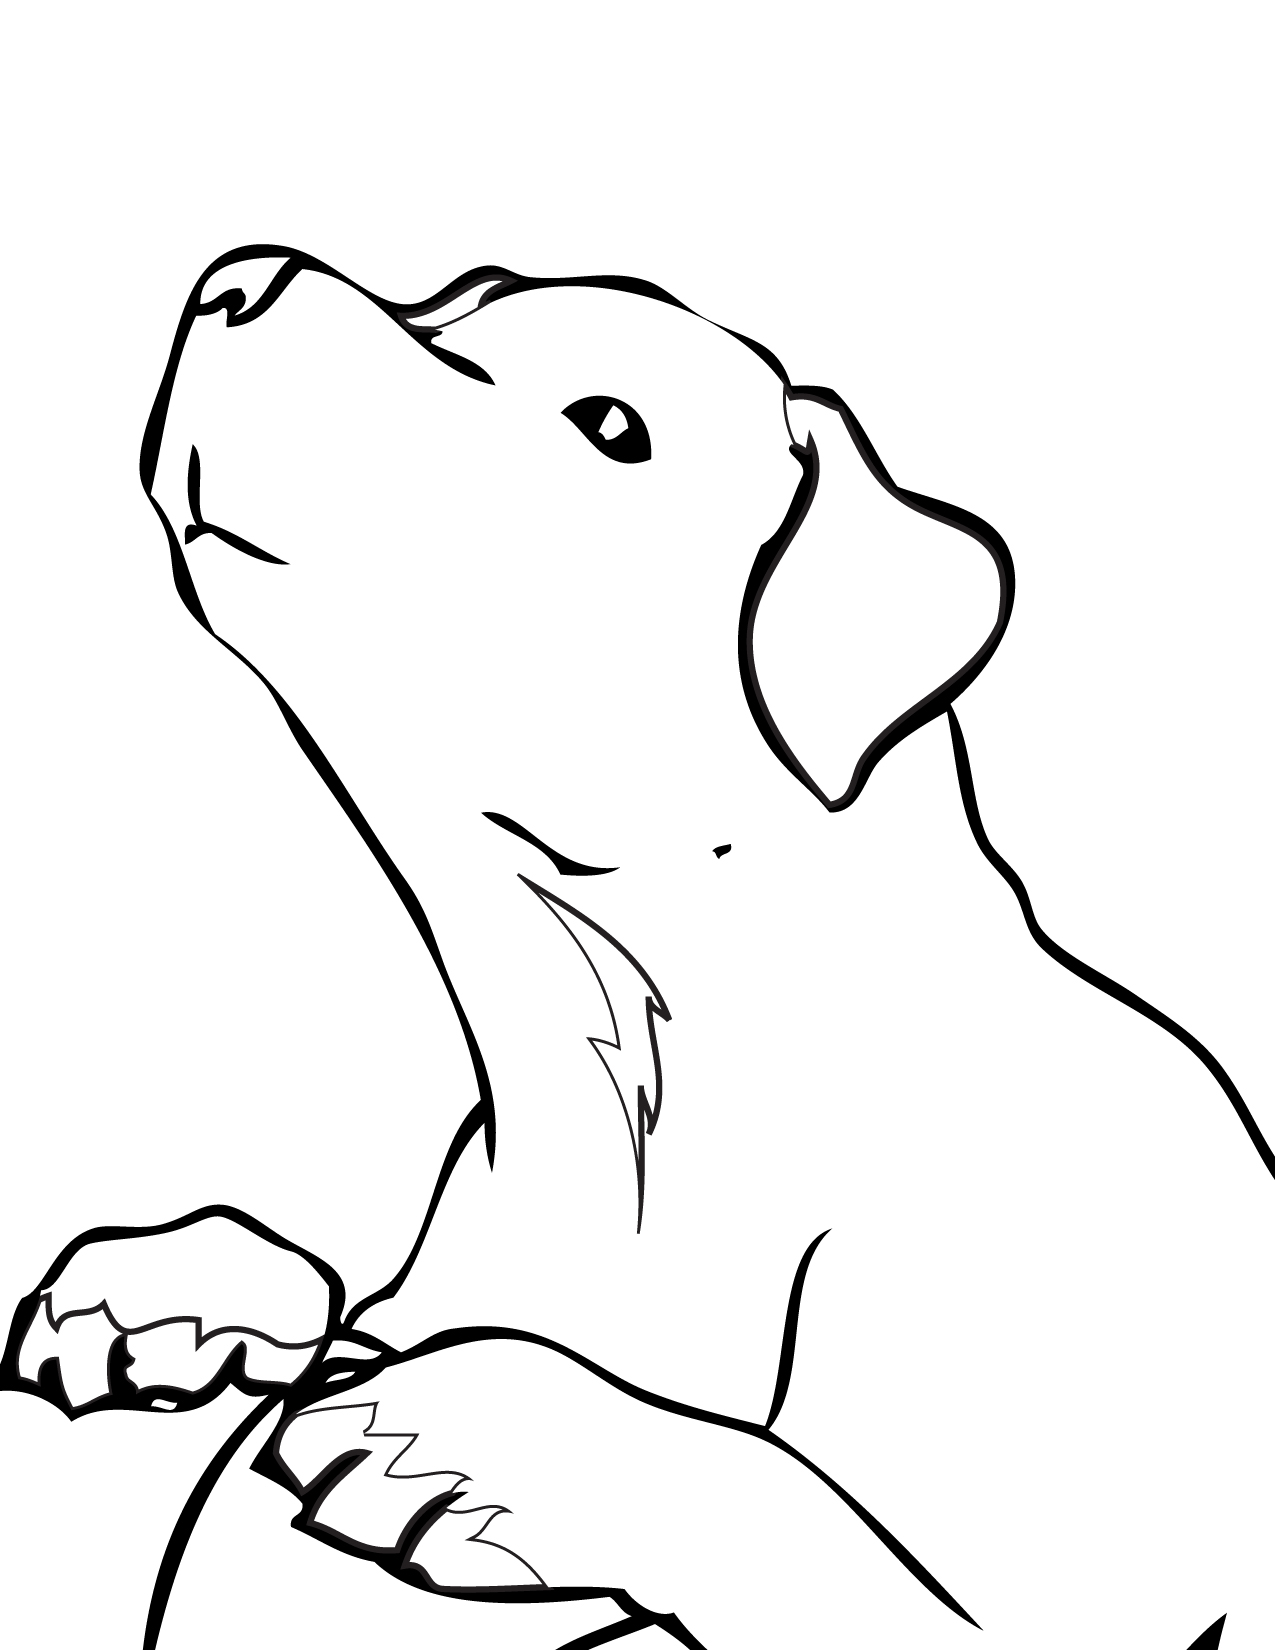 The best free Labrador drawing images. Download from 455 free drawings